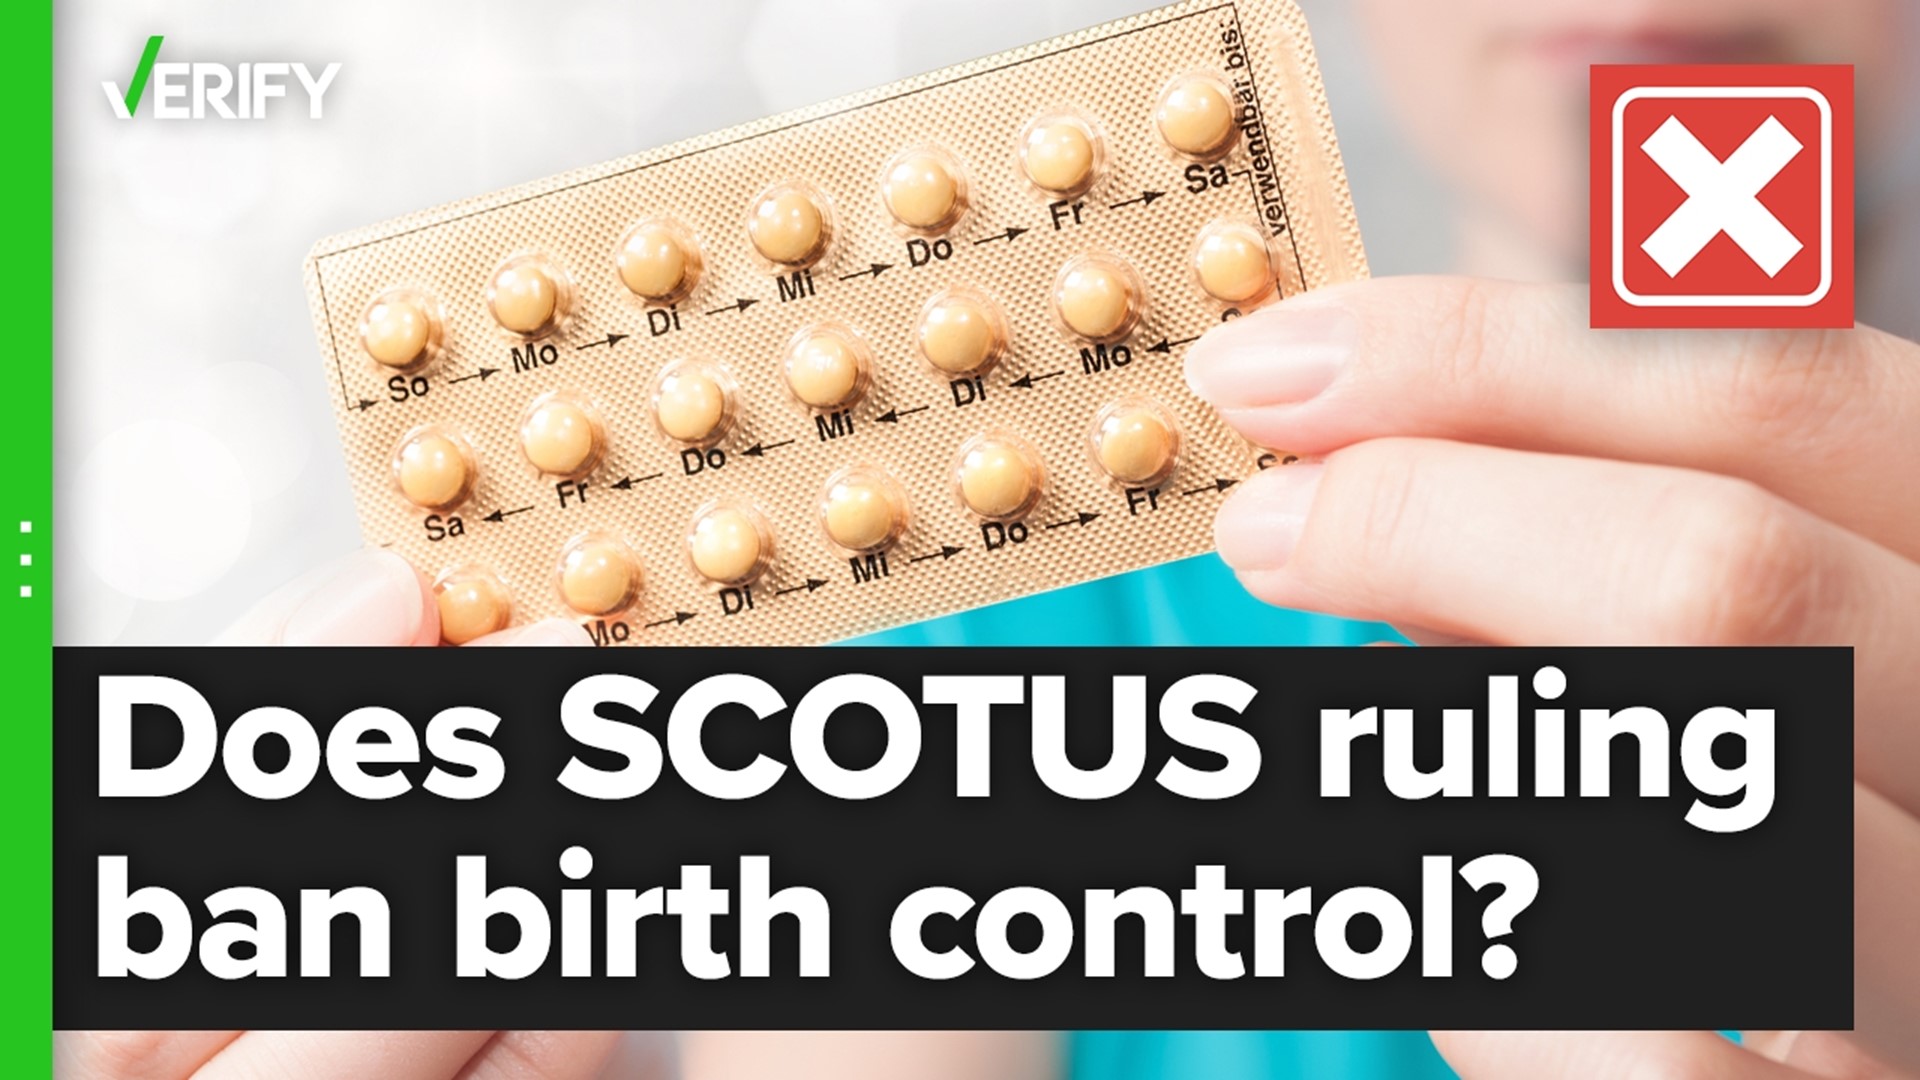 The Supreme Court’s decision eliminated the constitutional protection for abortion, but didn’t immediately affect the right to access birth control.